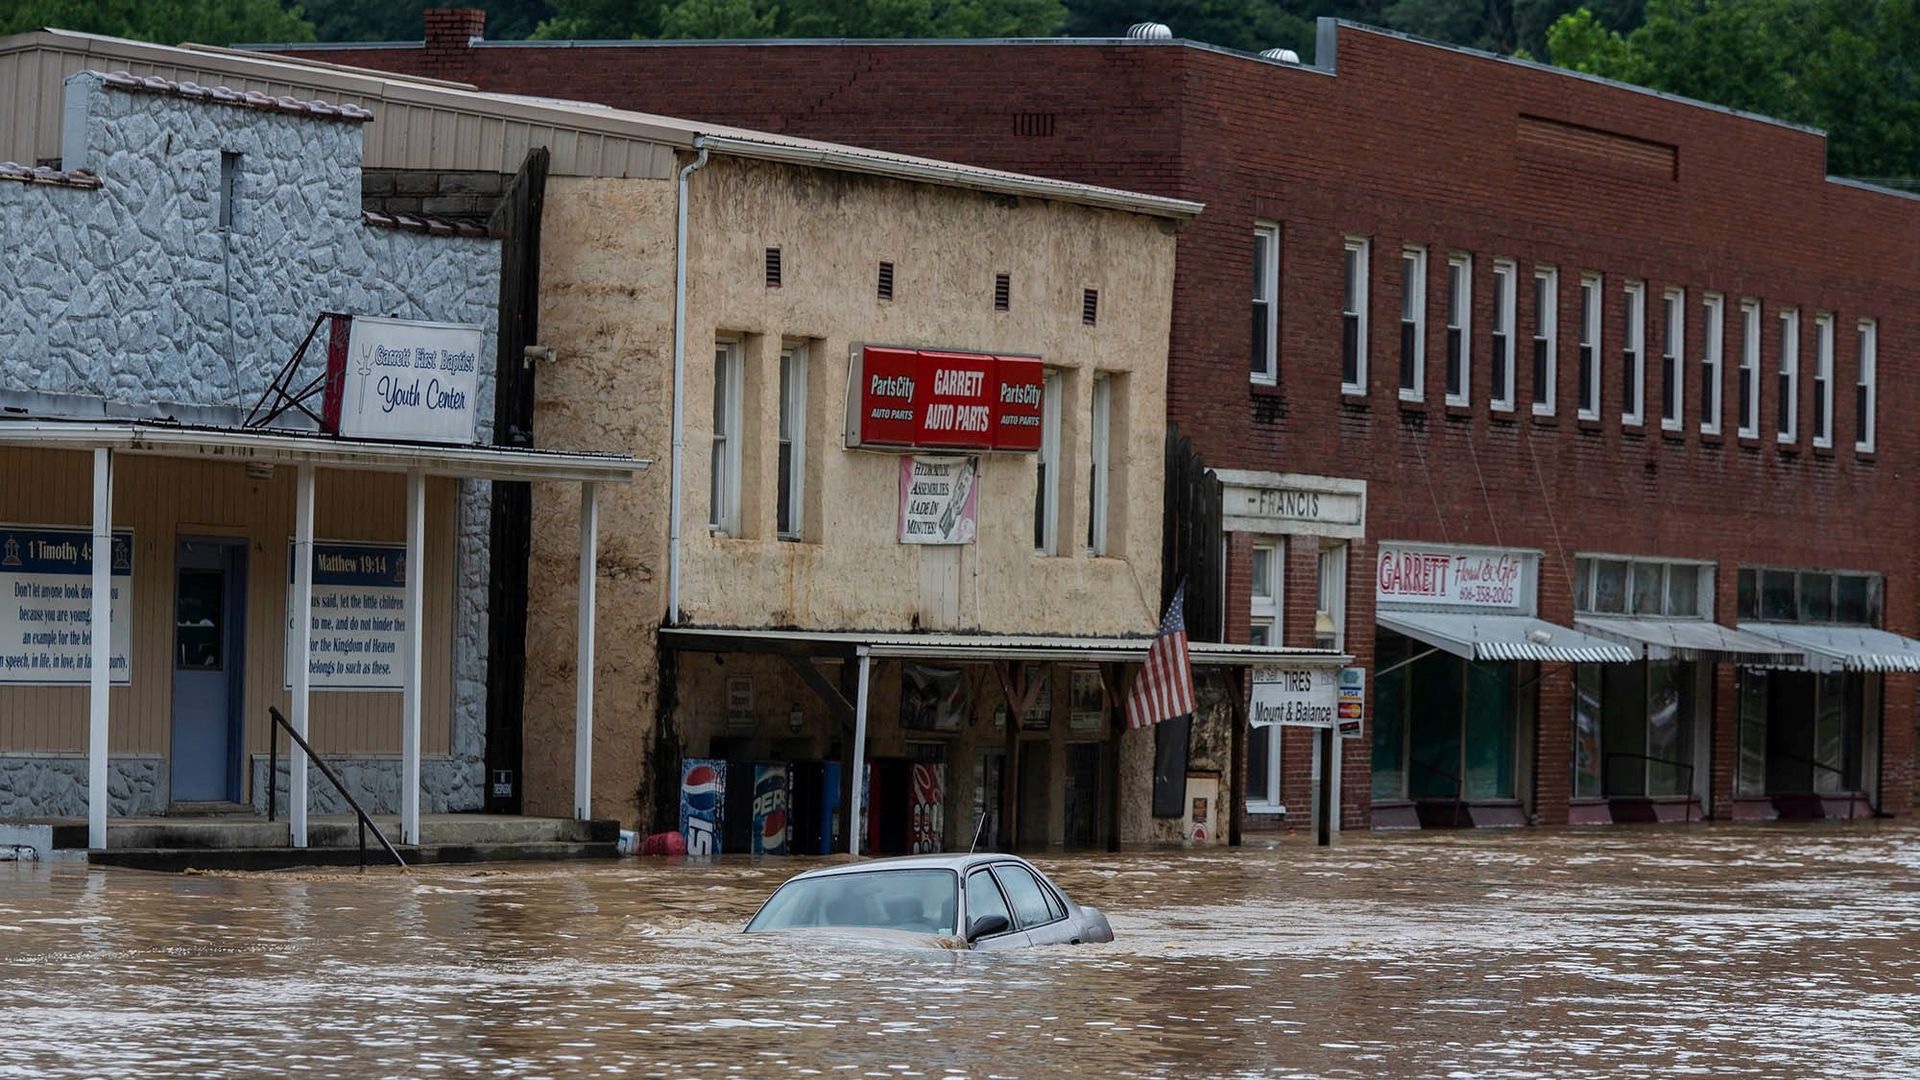 Floods kill 8, more deaths expected, says Kentucky governor